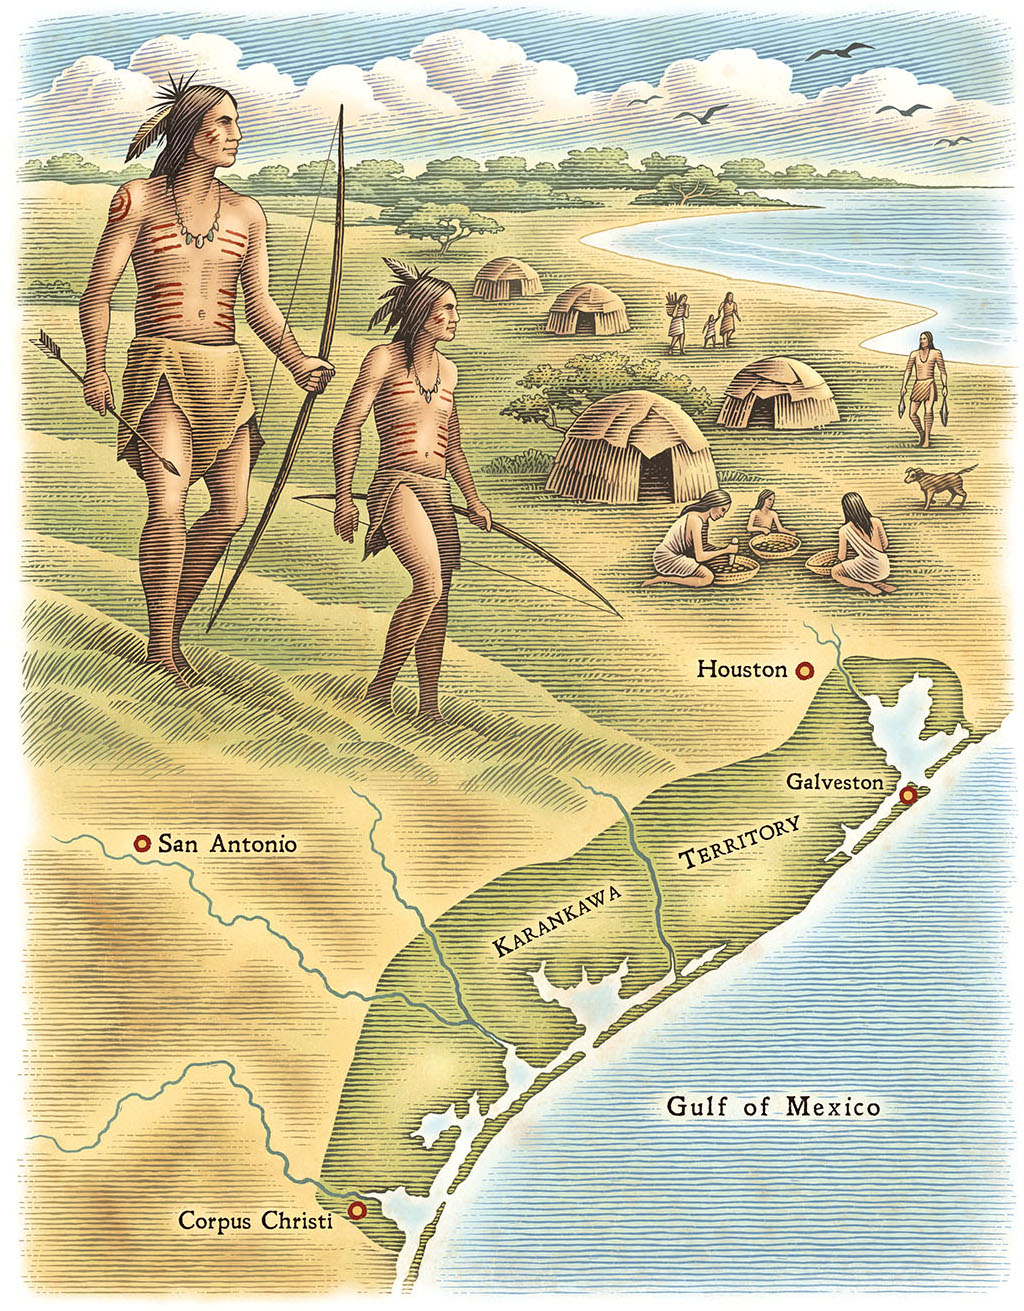 A map showing Karankawa native americans, their homes, and their territory overlaid on modern-day Texas